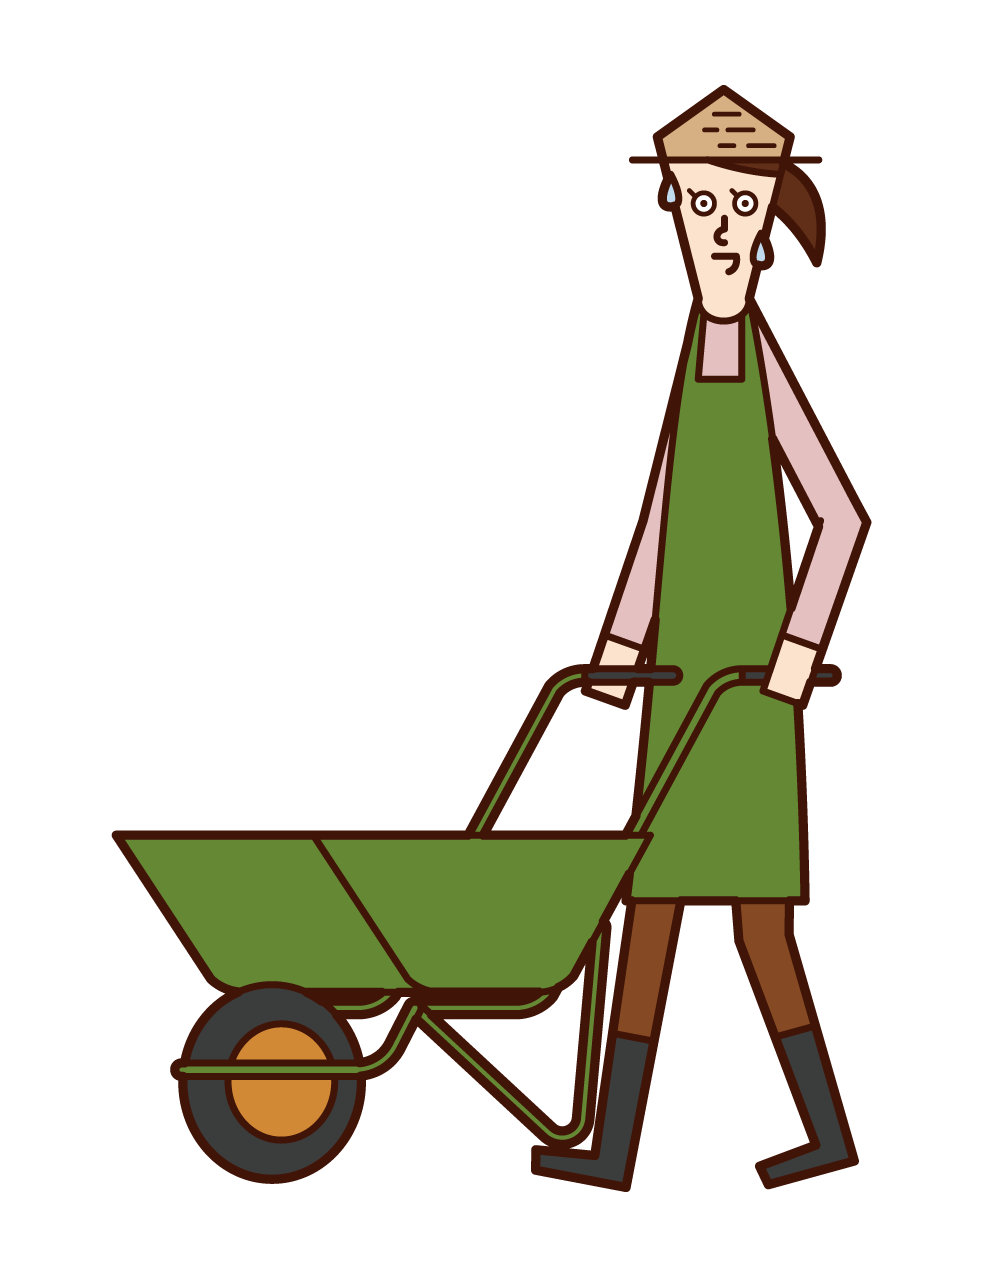 Illustration of a woman using a wheeled unicycle